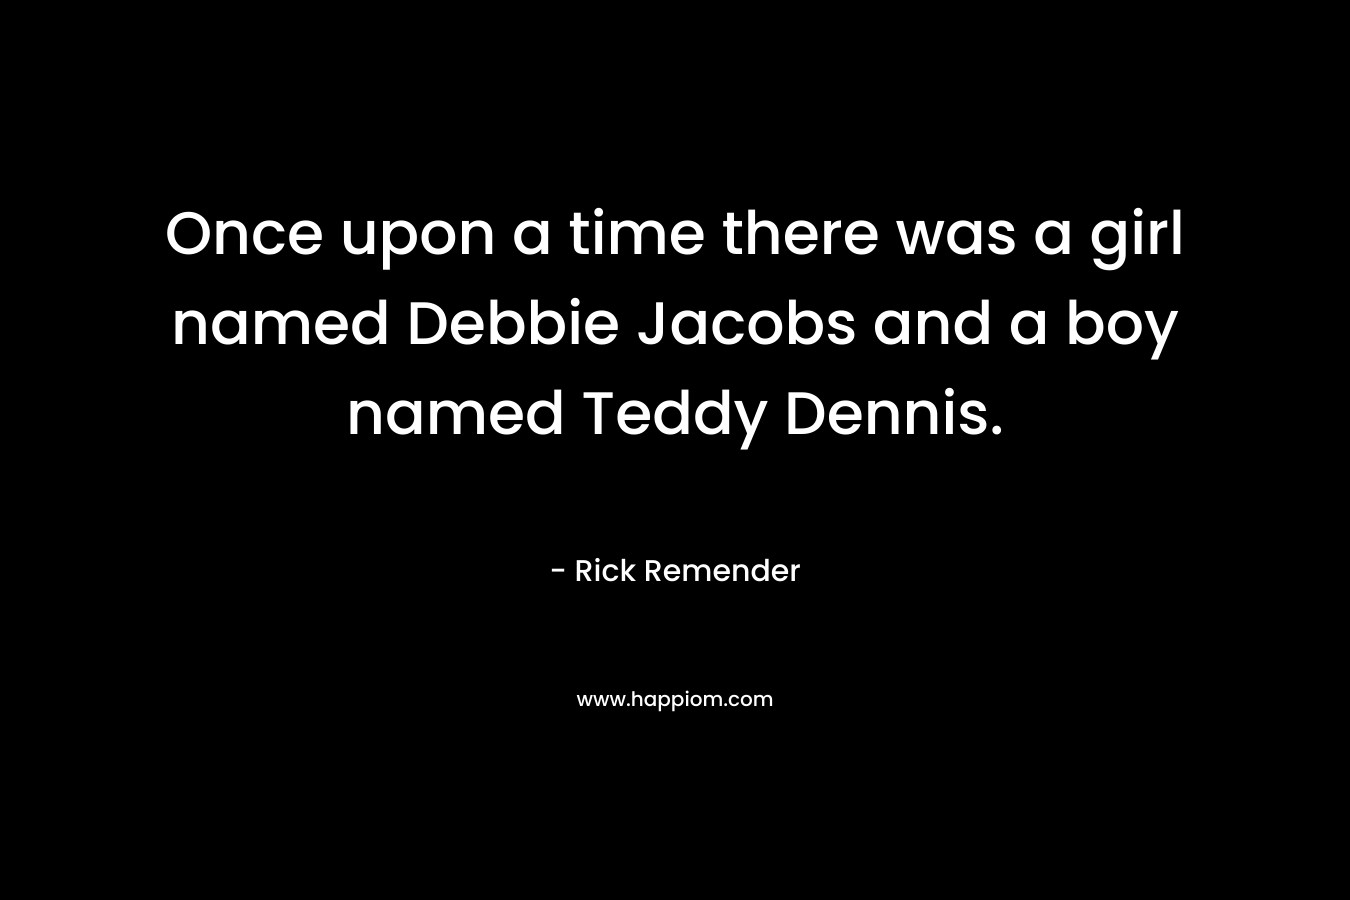 Once upon a time there was a girl named Debbie Jacobs and a boy named Teddy Dennis.